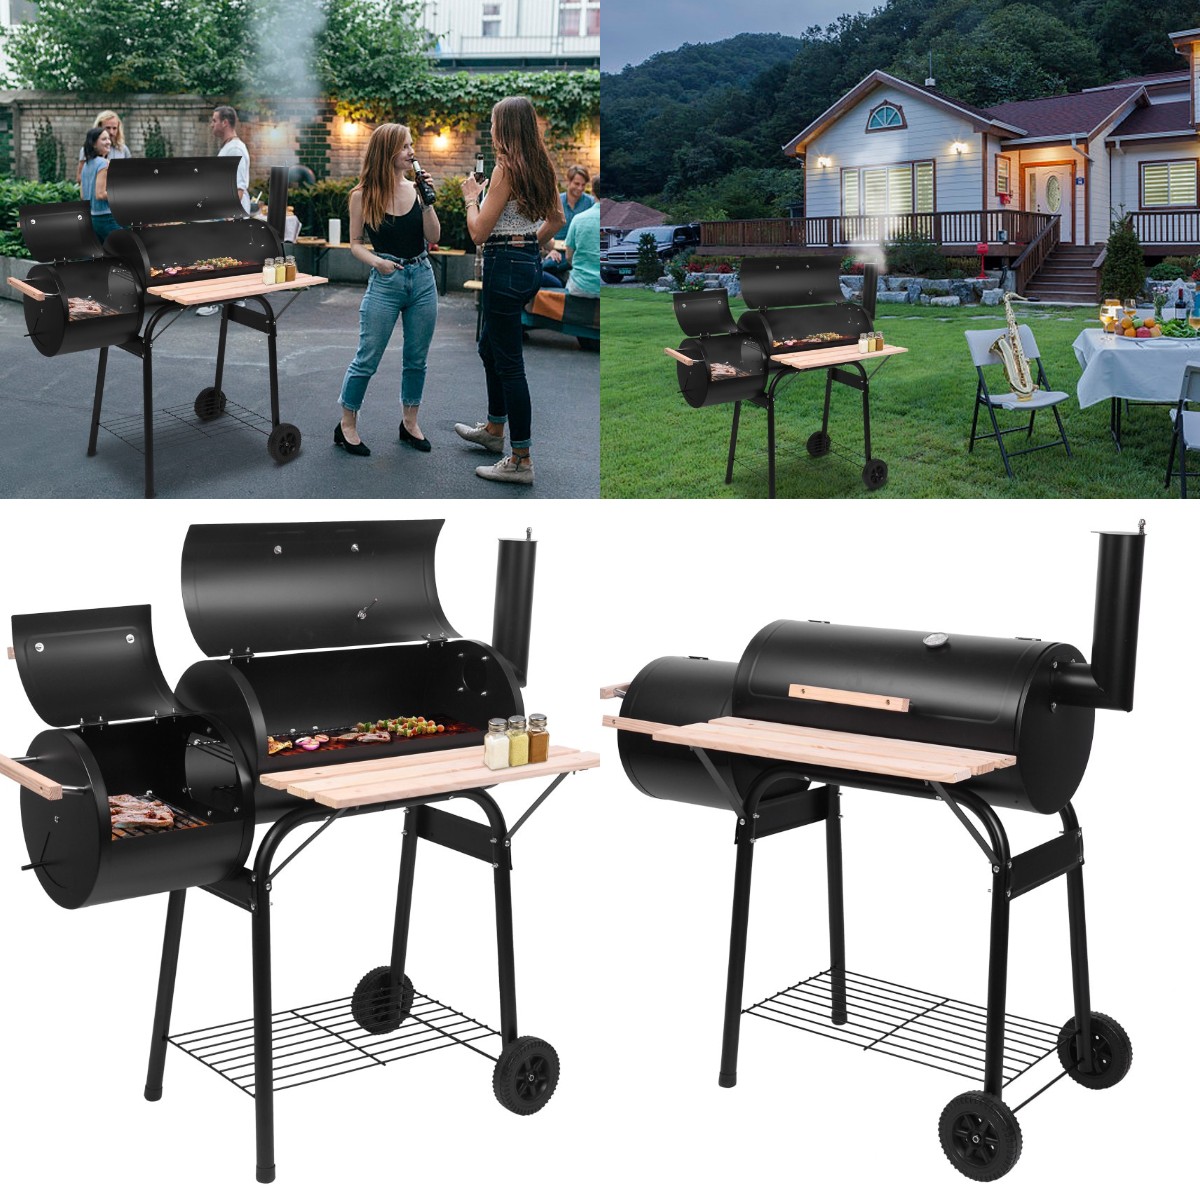 Goorabbit Charcoal Grill,BBQ Grills Clearance Charcoal With Smoker,Charcoal Grill,BBQ Grills Clearance Charcoal With Smoker,24.4" L x 29.6" H Portable Charcoal Grill with Convenient Storage,Black - image 1 of 10